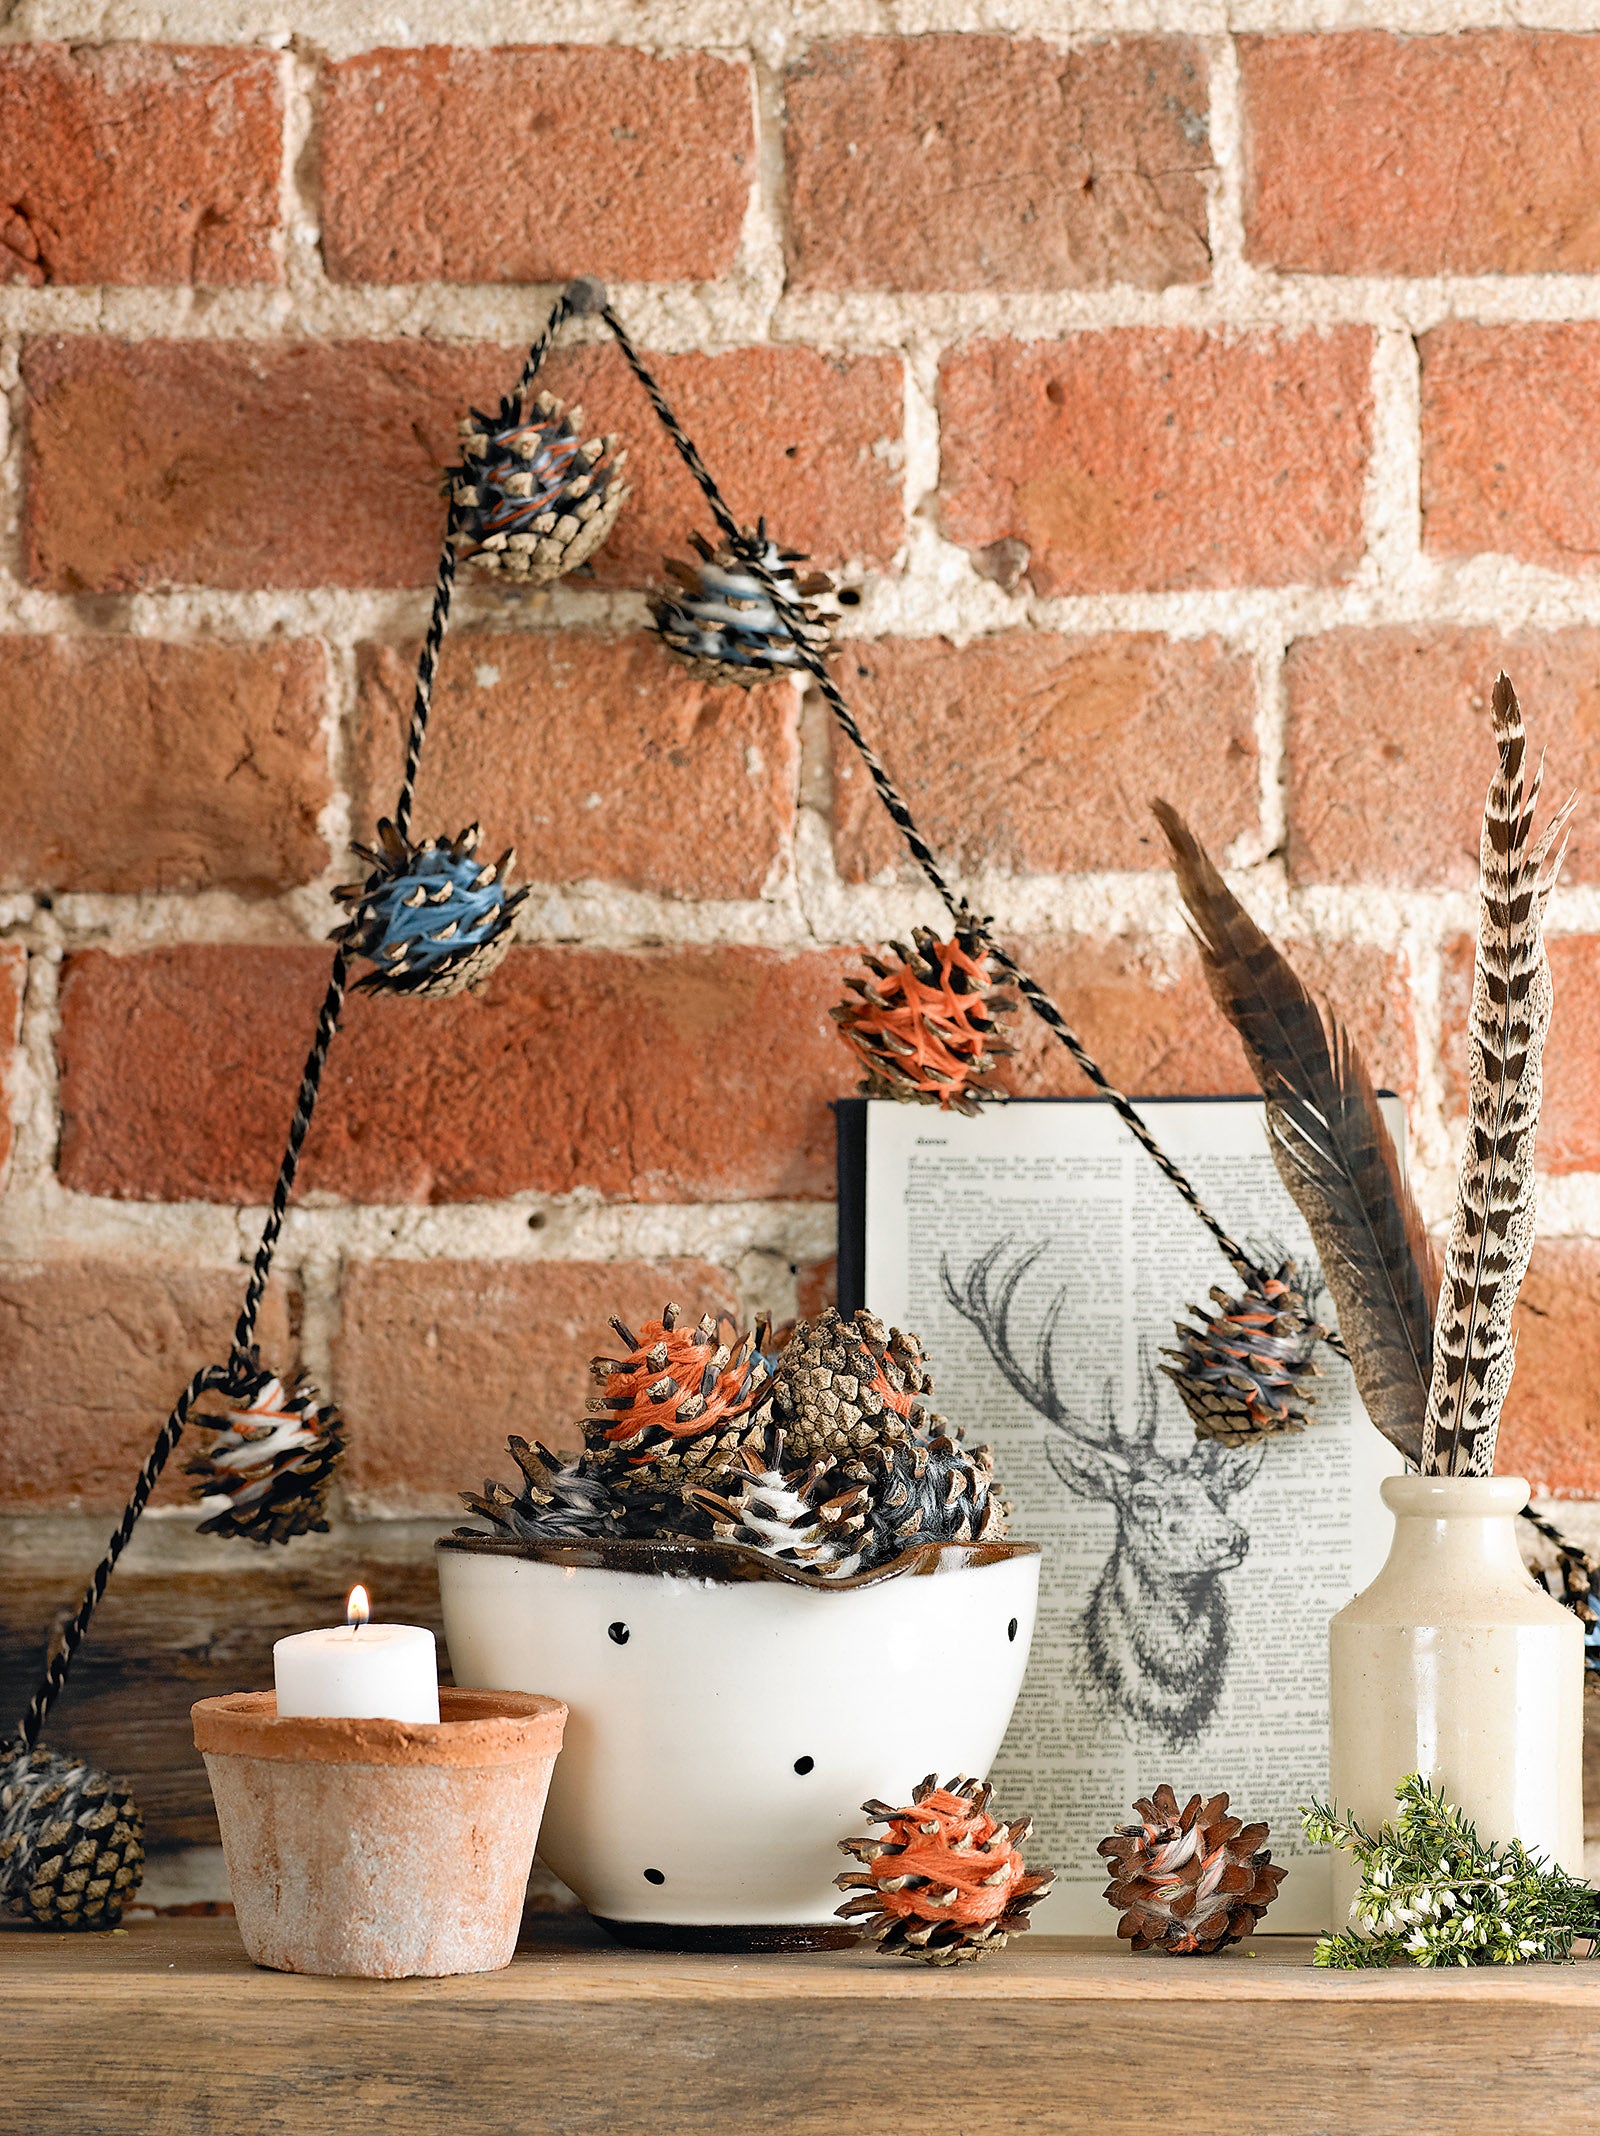 Handmade pine cones displayed on a string to make a decorative garland on a brick wall.